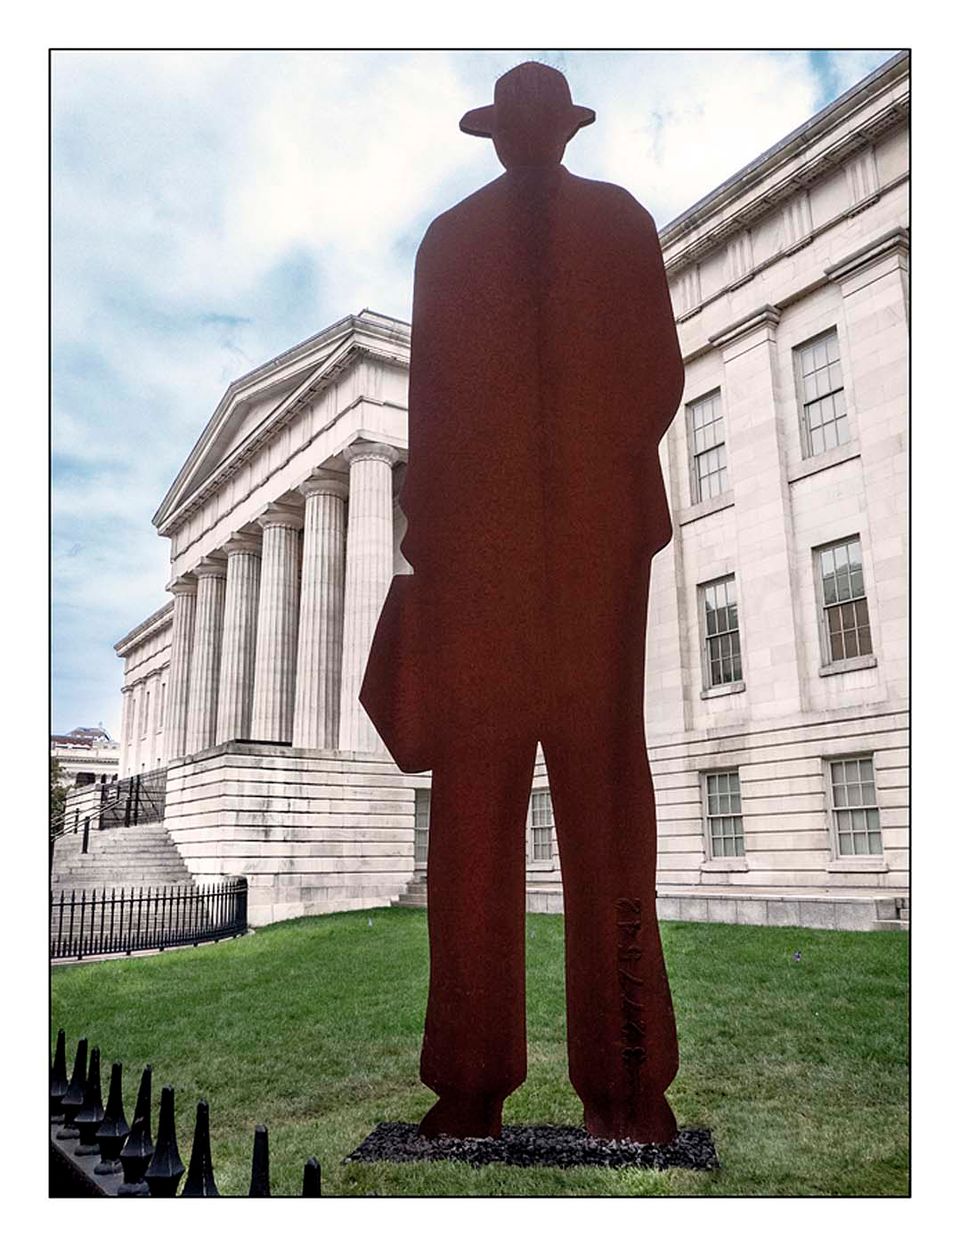 This image shows a large sculpture of a man in a top hat wearing a suit that is located outside of the museum